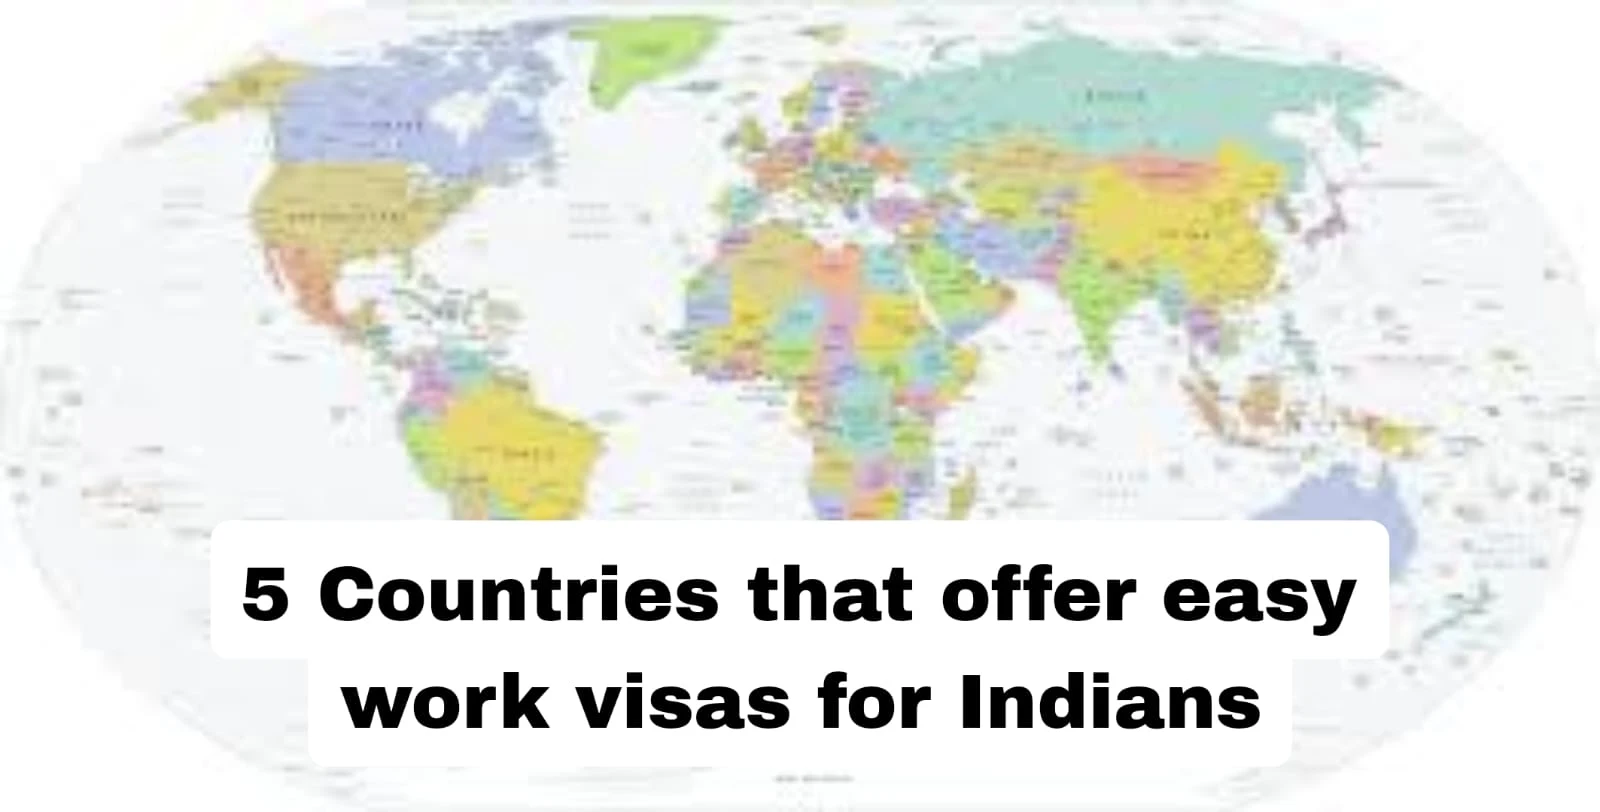 5 countries that offer easy work visas for Indians